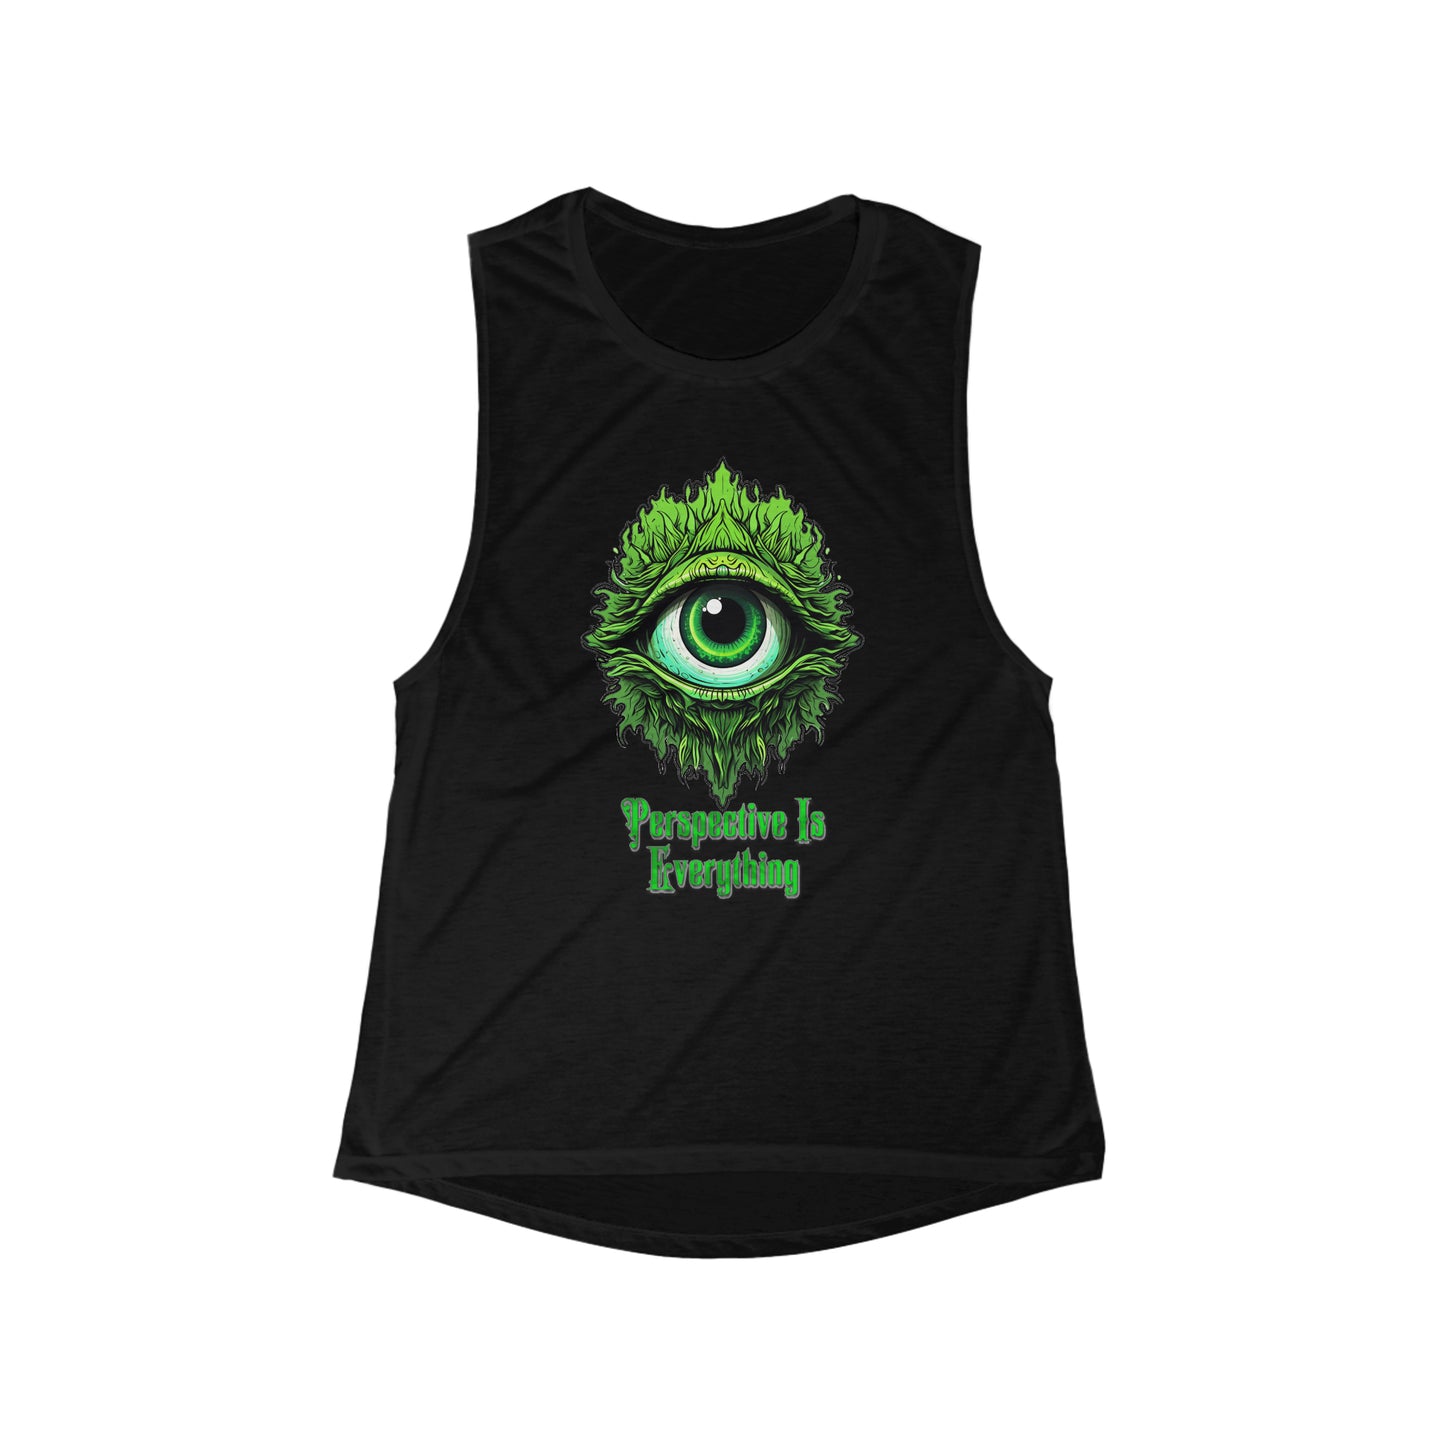 Perspective is Everything: Green | Women's Flowy Scoop Muscle Tank